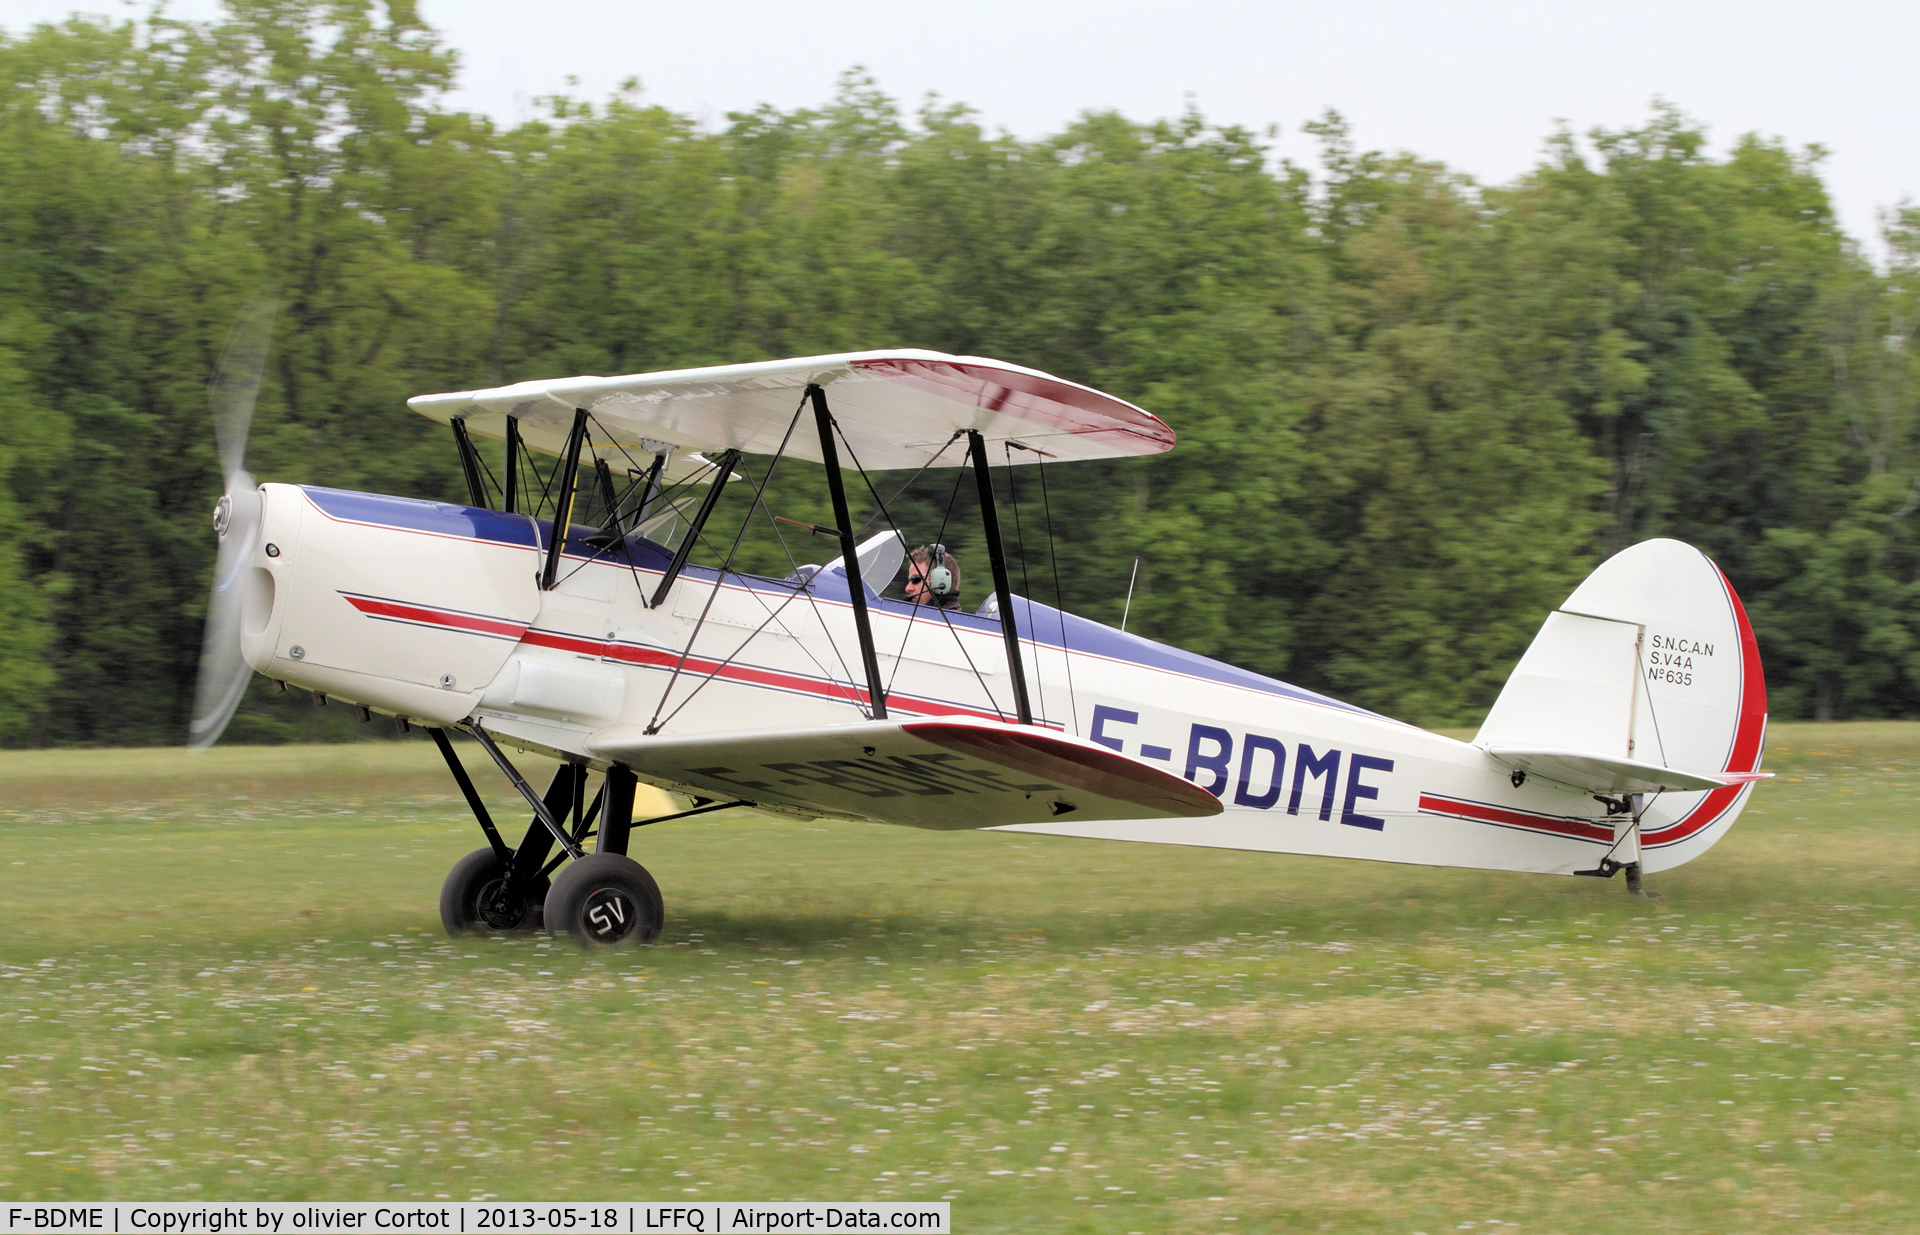 F-BDME, Stampe-Vertongen SV-4A C/N 635, taxiing at the Ferté Alais airshow